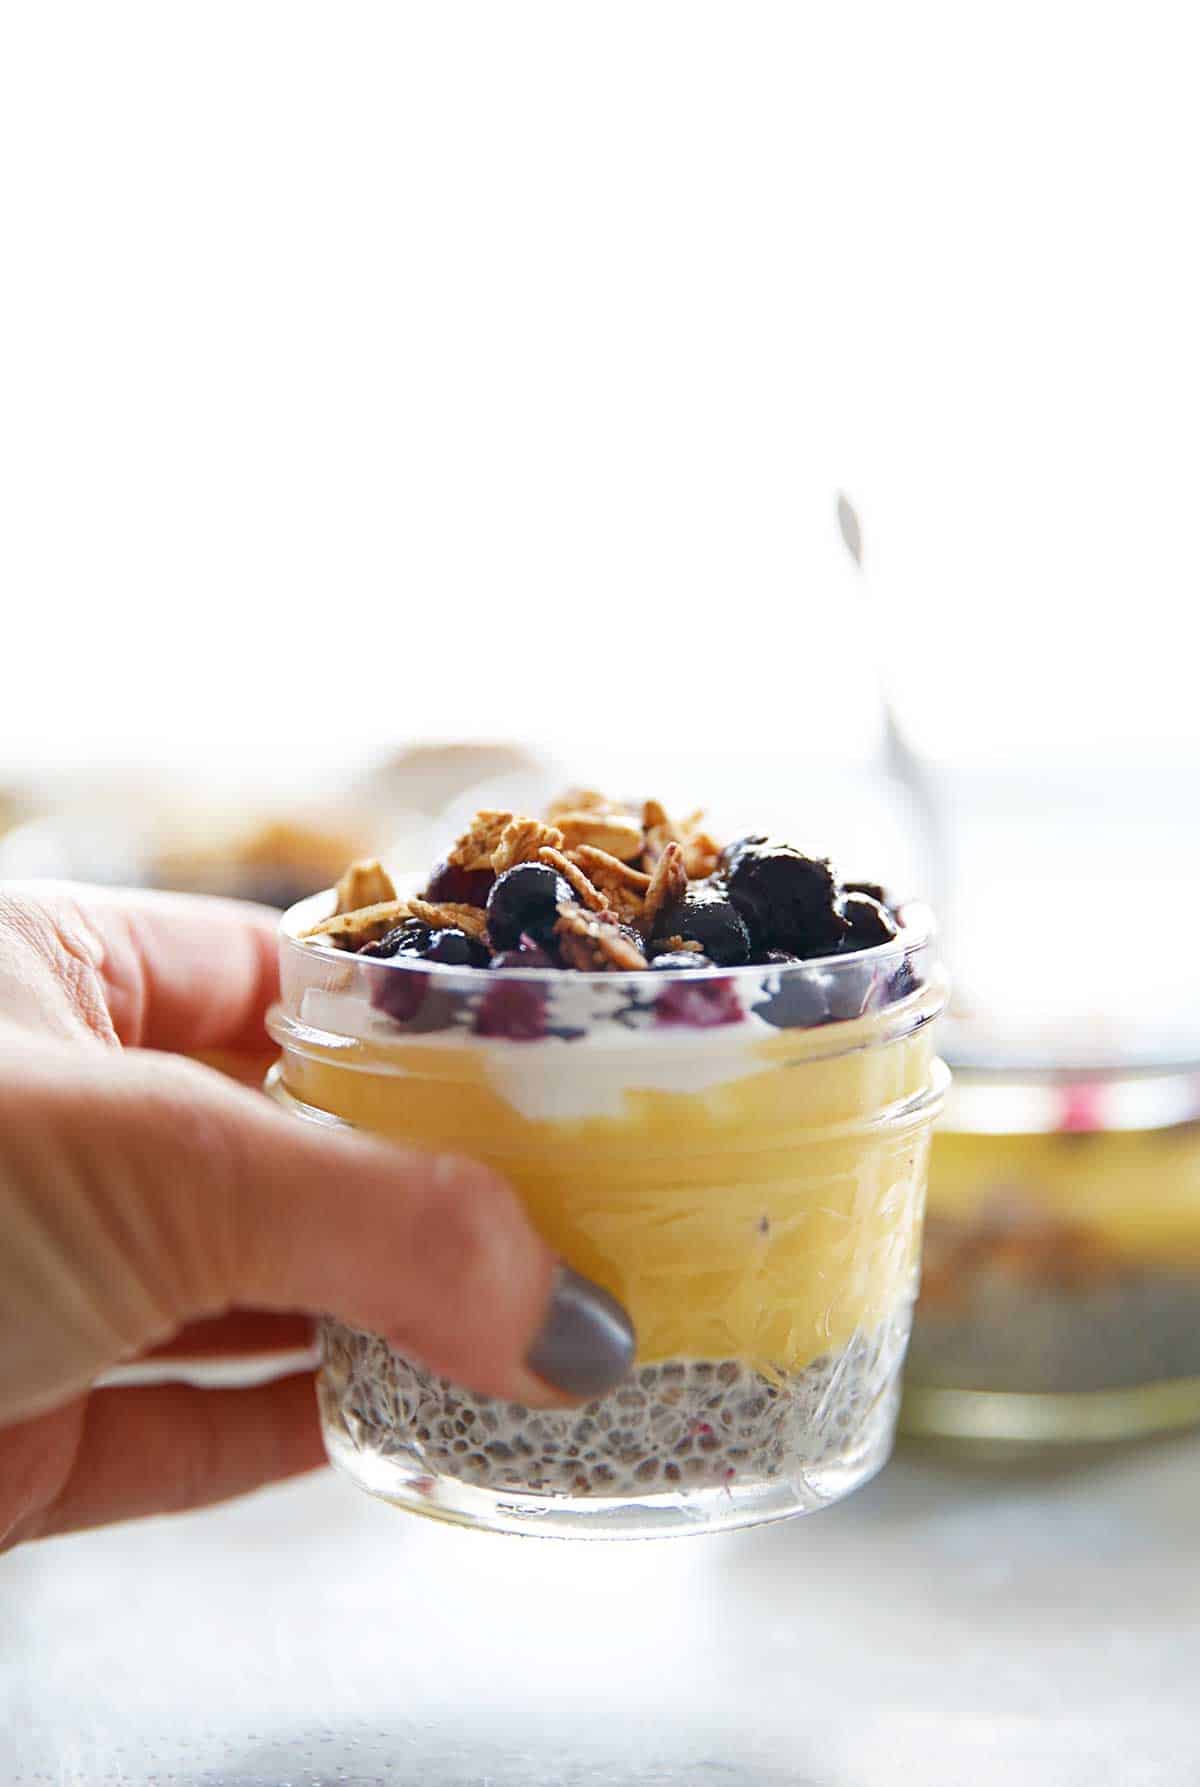 Lemon Curd and Blueberry Compote Breakfast Parfaits - Lexi's Clean Kitchen